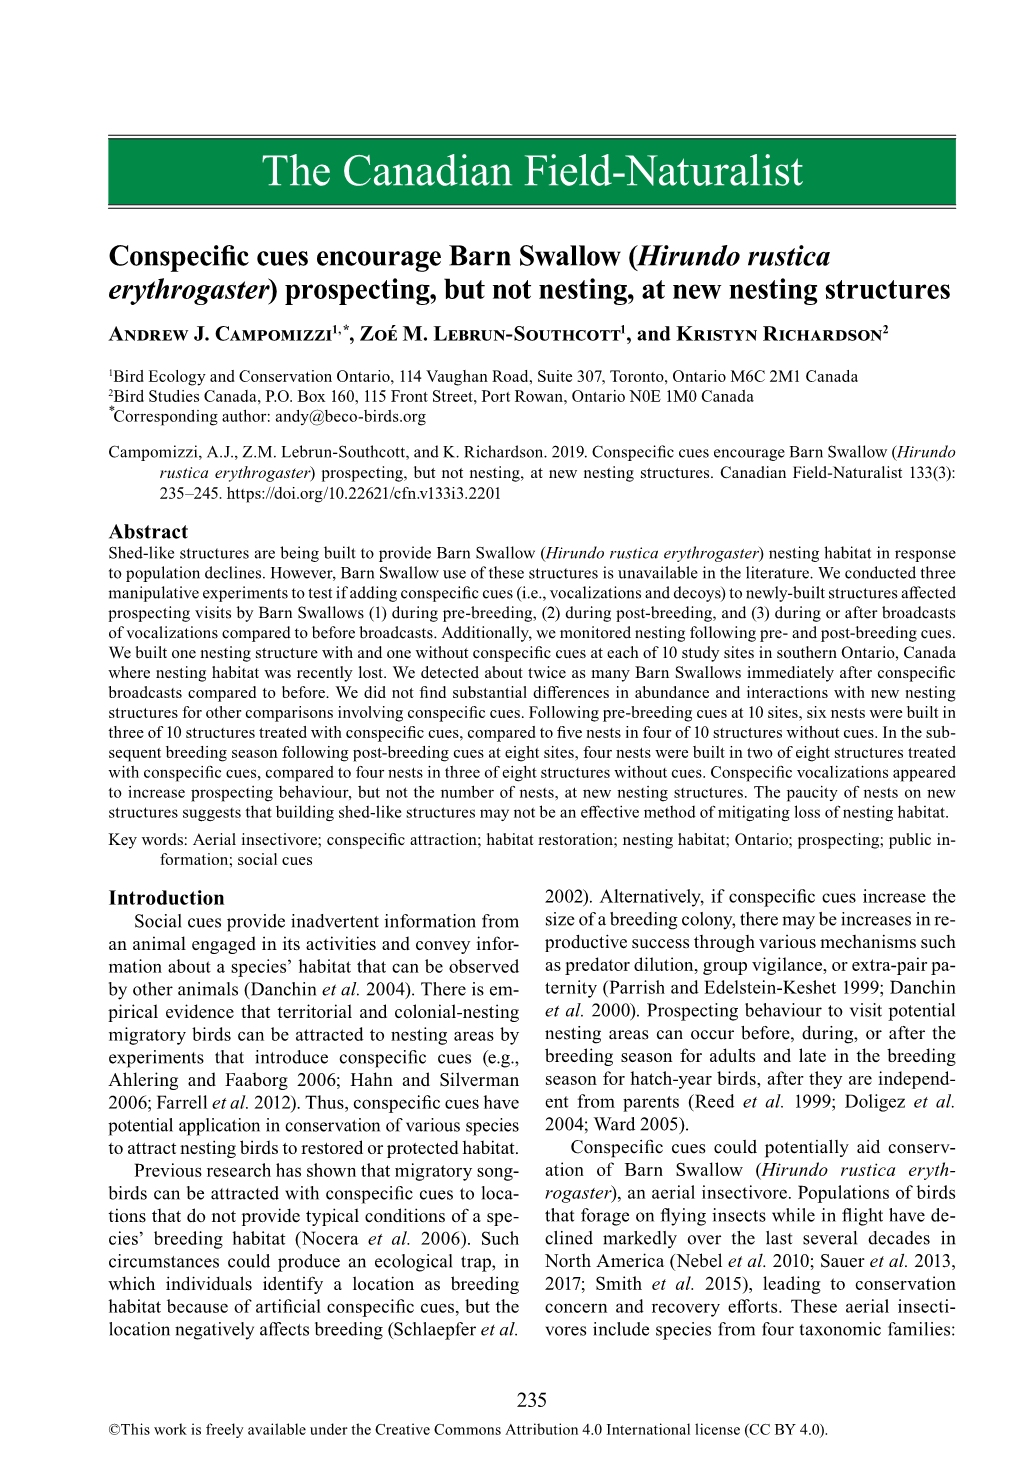 Conspecific Cues Encourage Barn Swallow Hirundo( Rustica Erythrogaster) Prospecting, but Not Nesting, at New Nesting Structures Andrew J